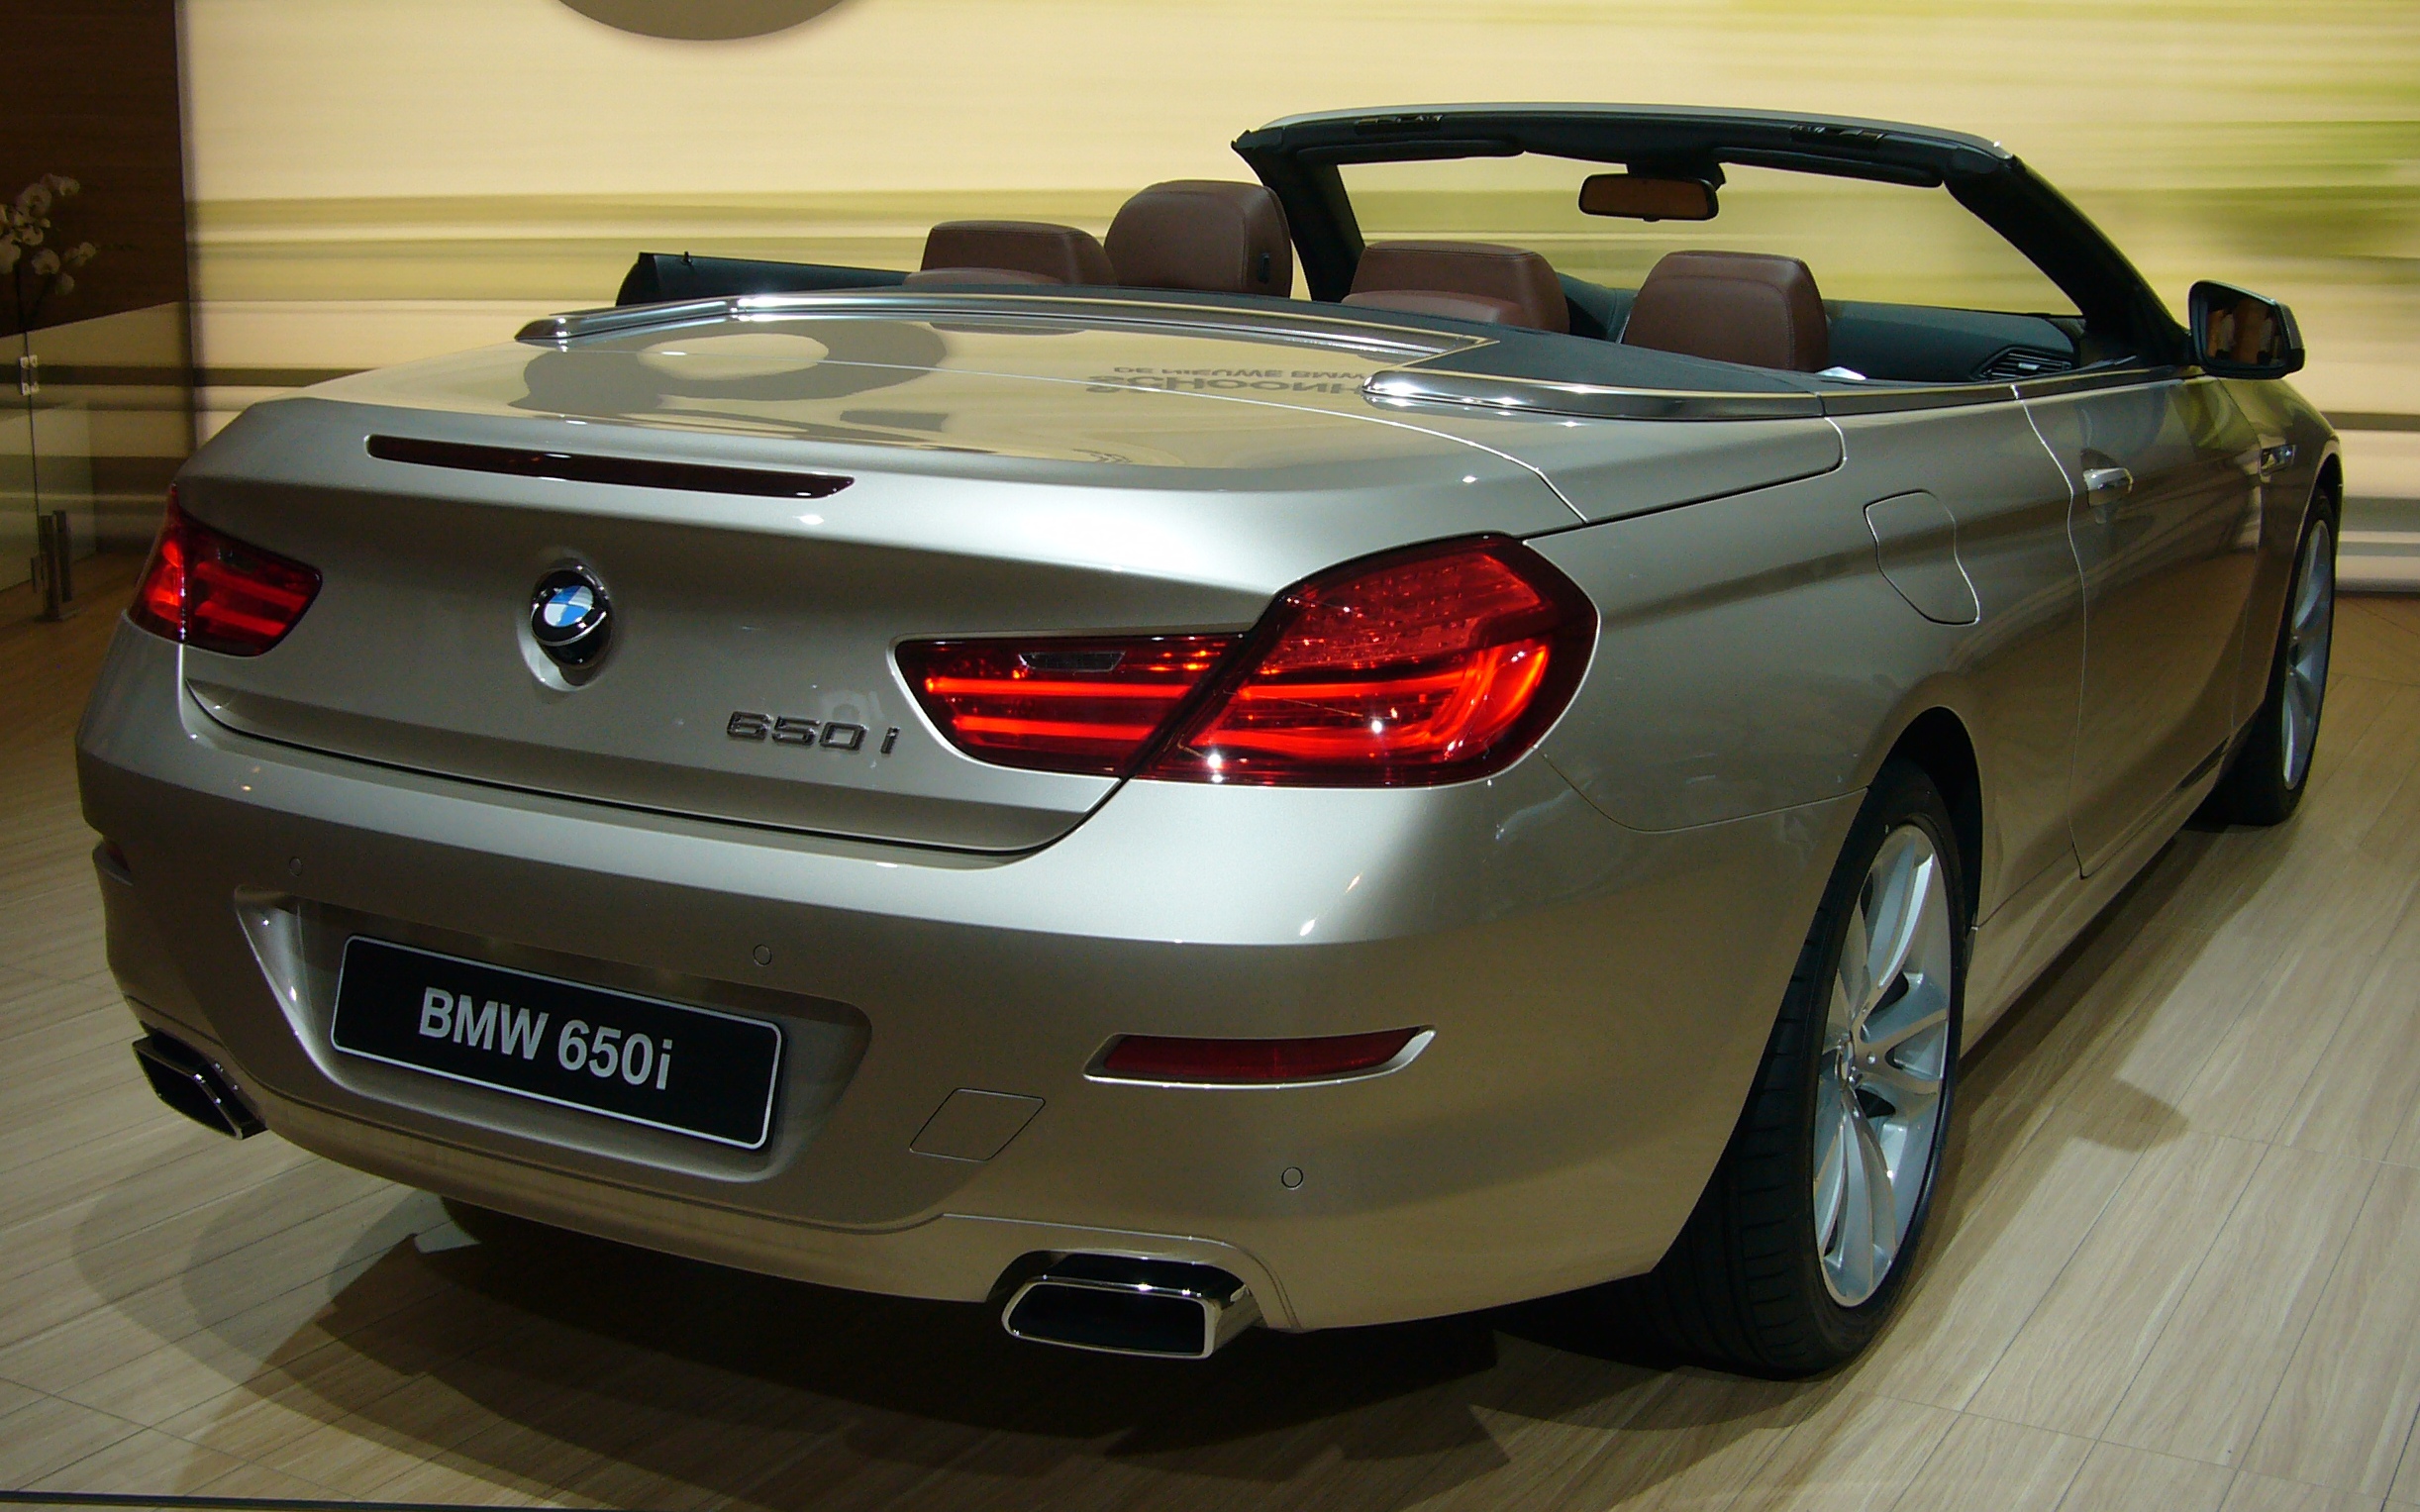  650i Convertible on File Bmw 6 Series Convertible  Rear  Jpg   Wikipedia  The Free